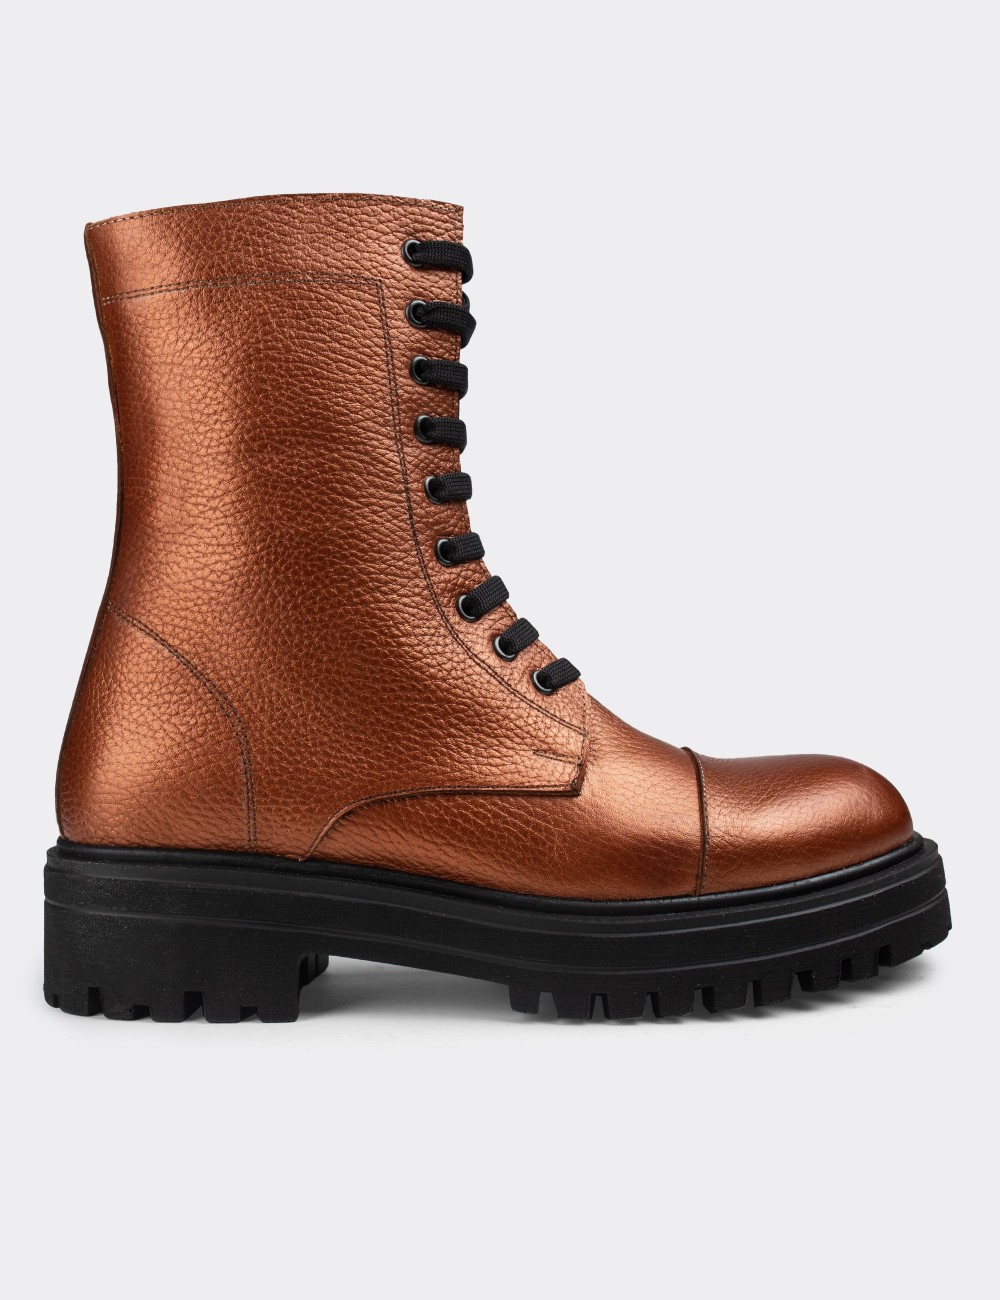 Copper  Leather Boots - 01802ZBKRE01